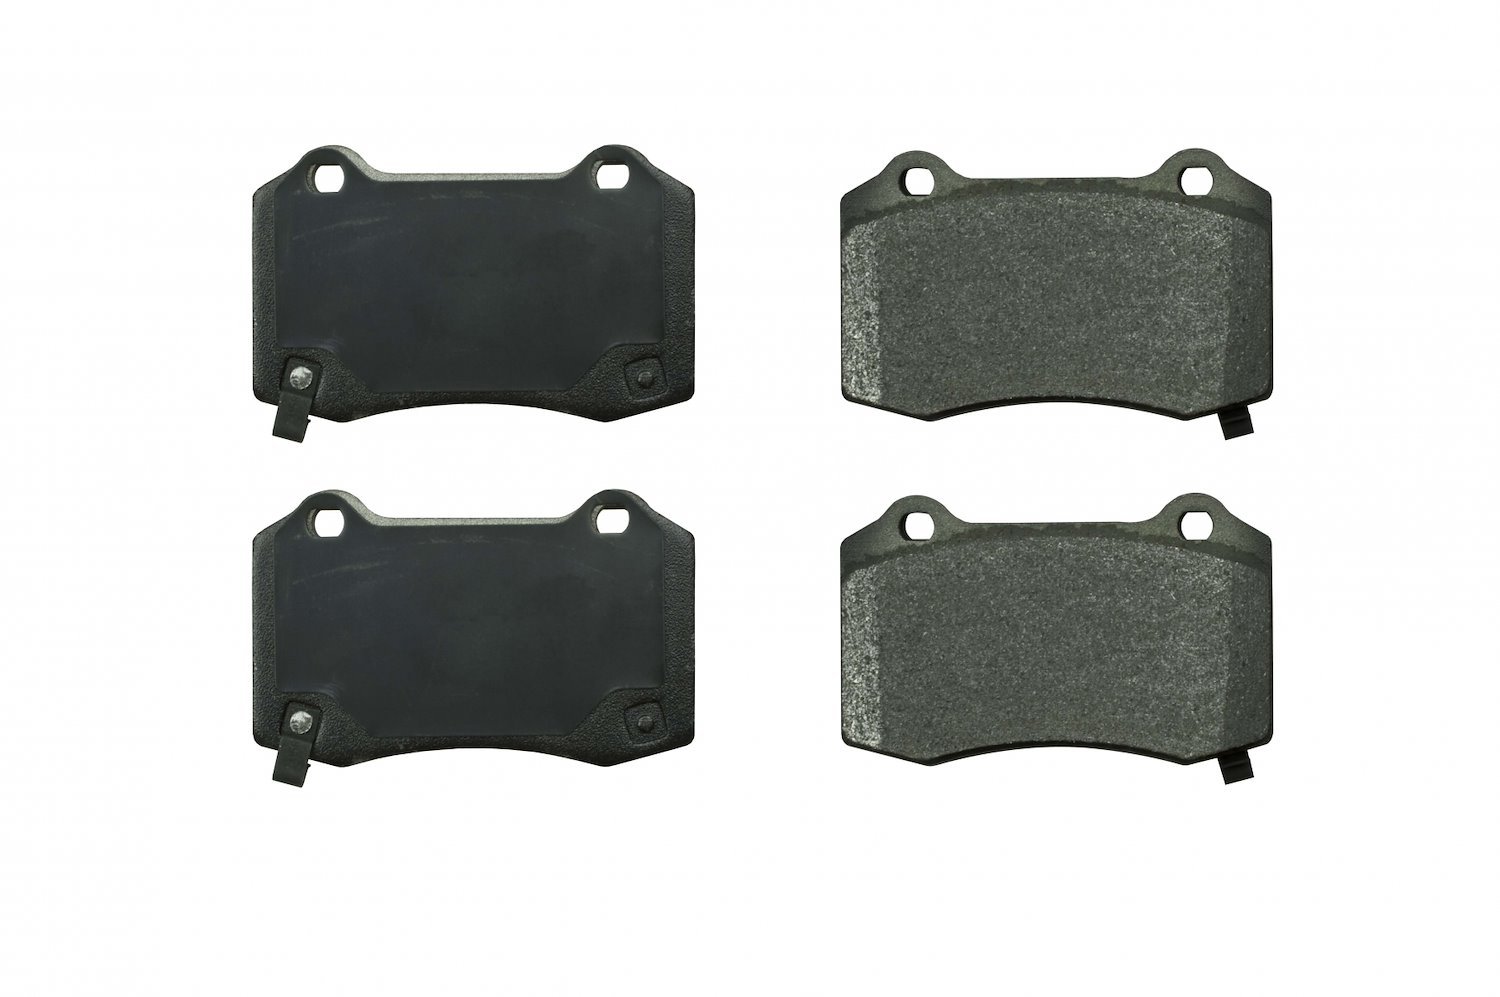 "04 - "11 Cadillac/Chevrolet/Chrysler/Dodge/Jeep - CTS/STS/Camaro/300/CHarger/Magnum/Grand Cherokee, Brake pads